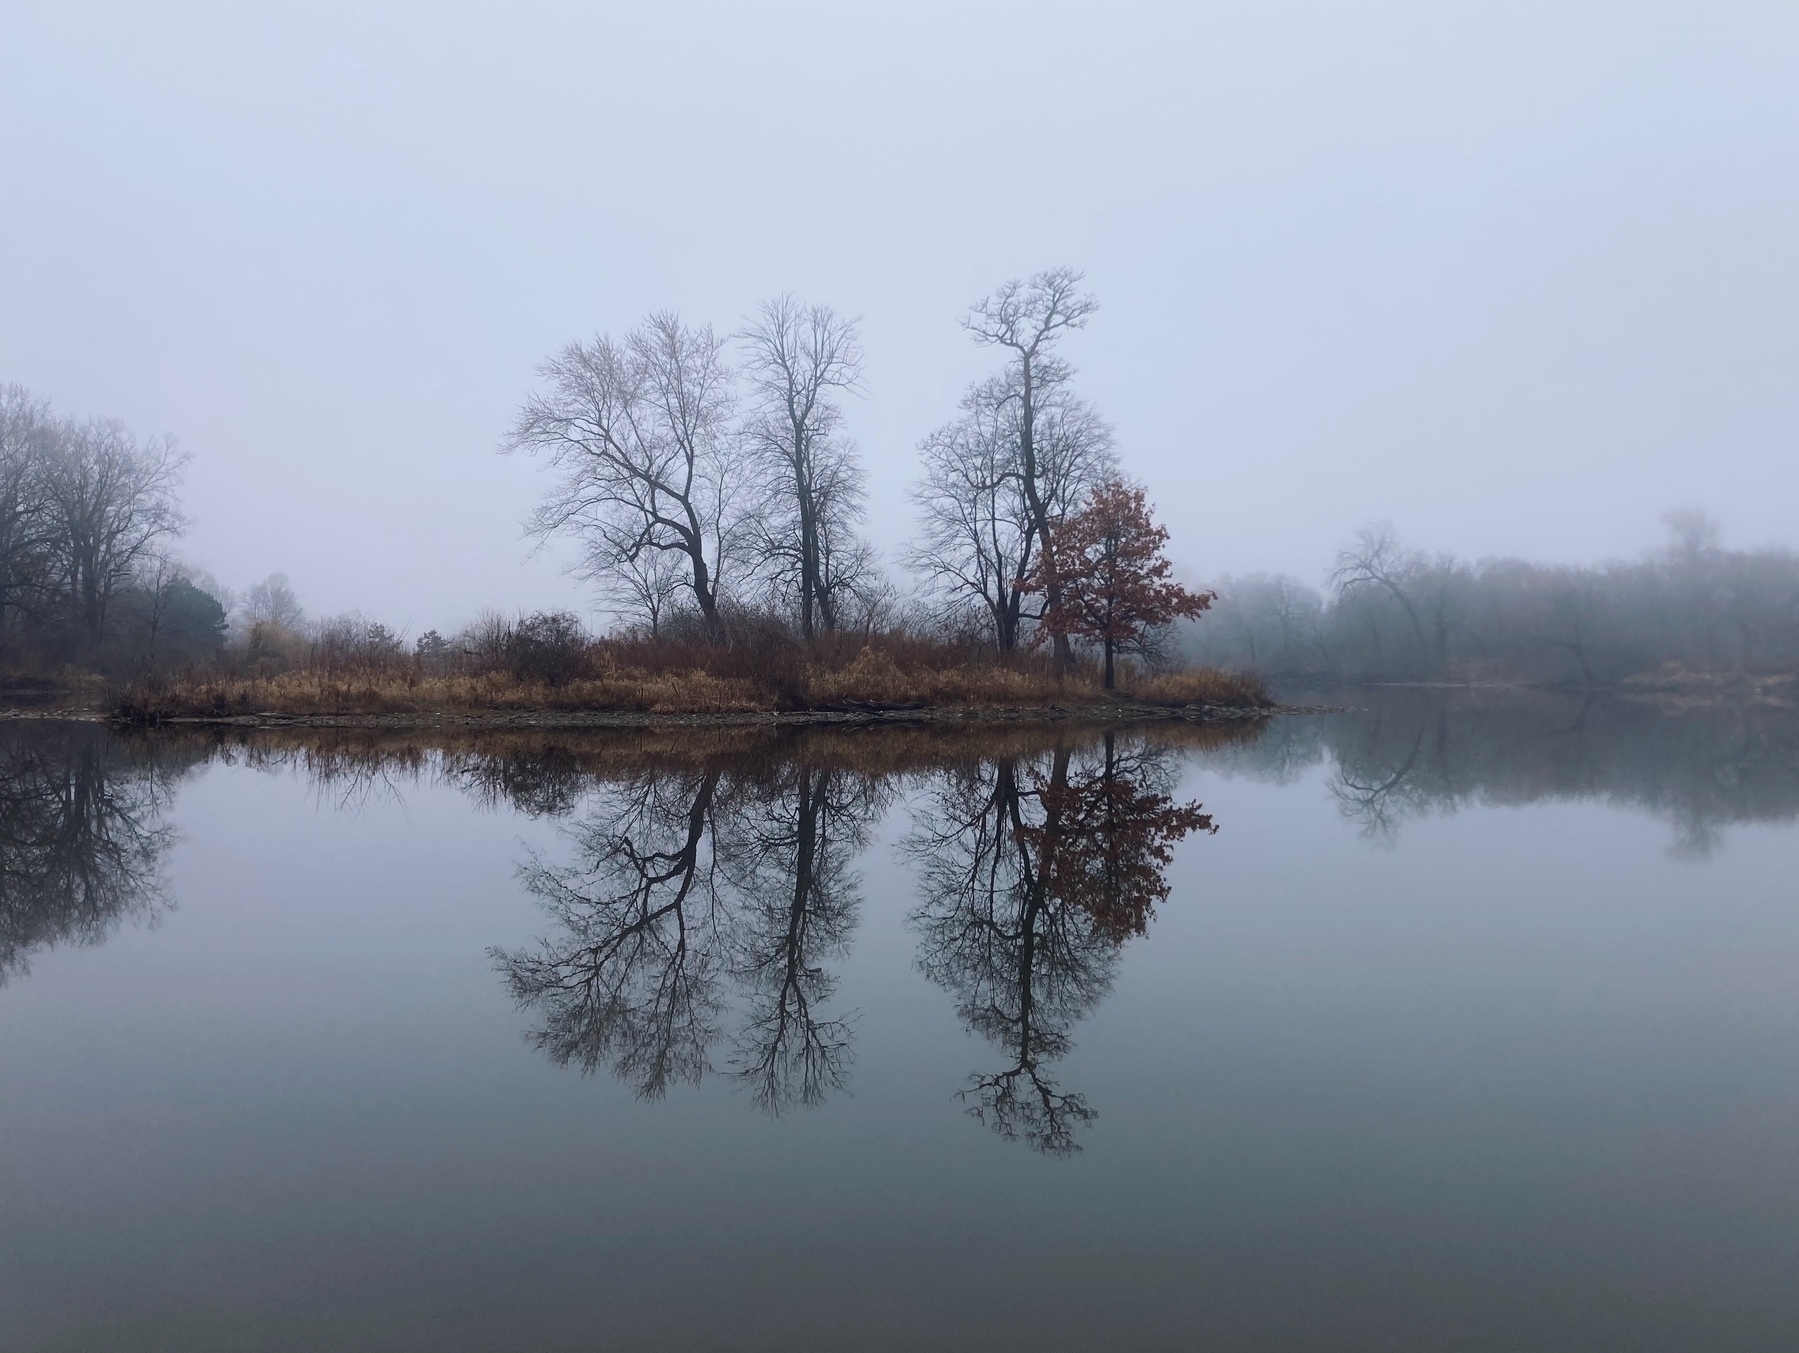 The lagoon in Chicago’s Jackson Park blanketed with fog.